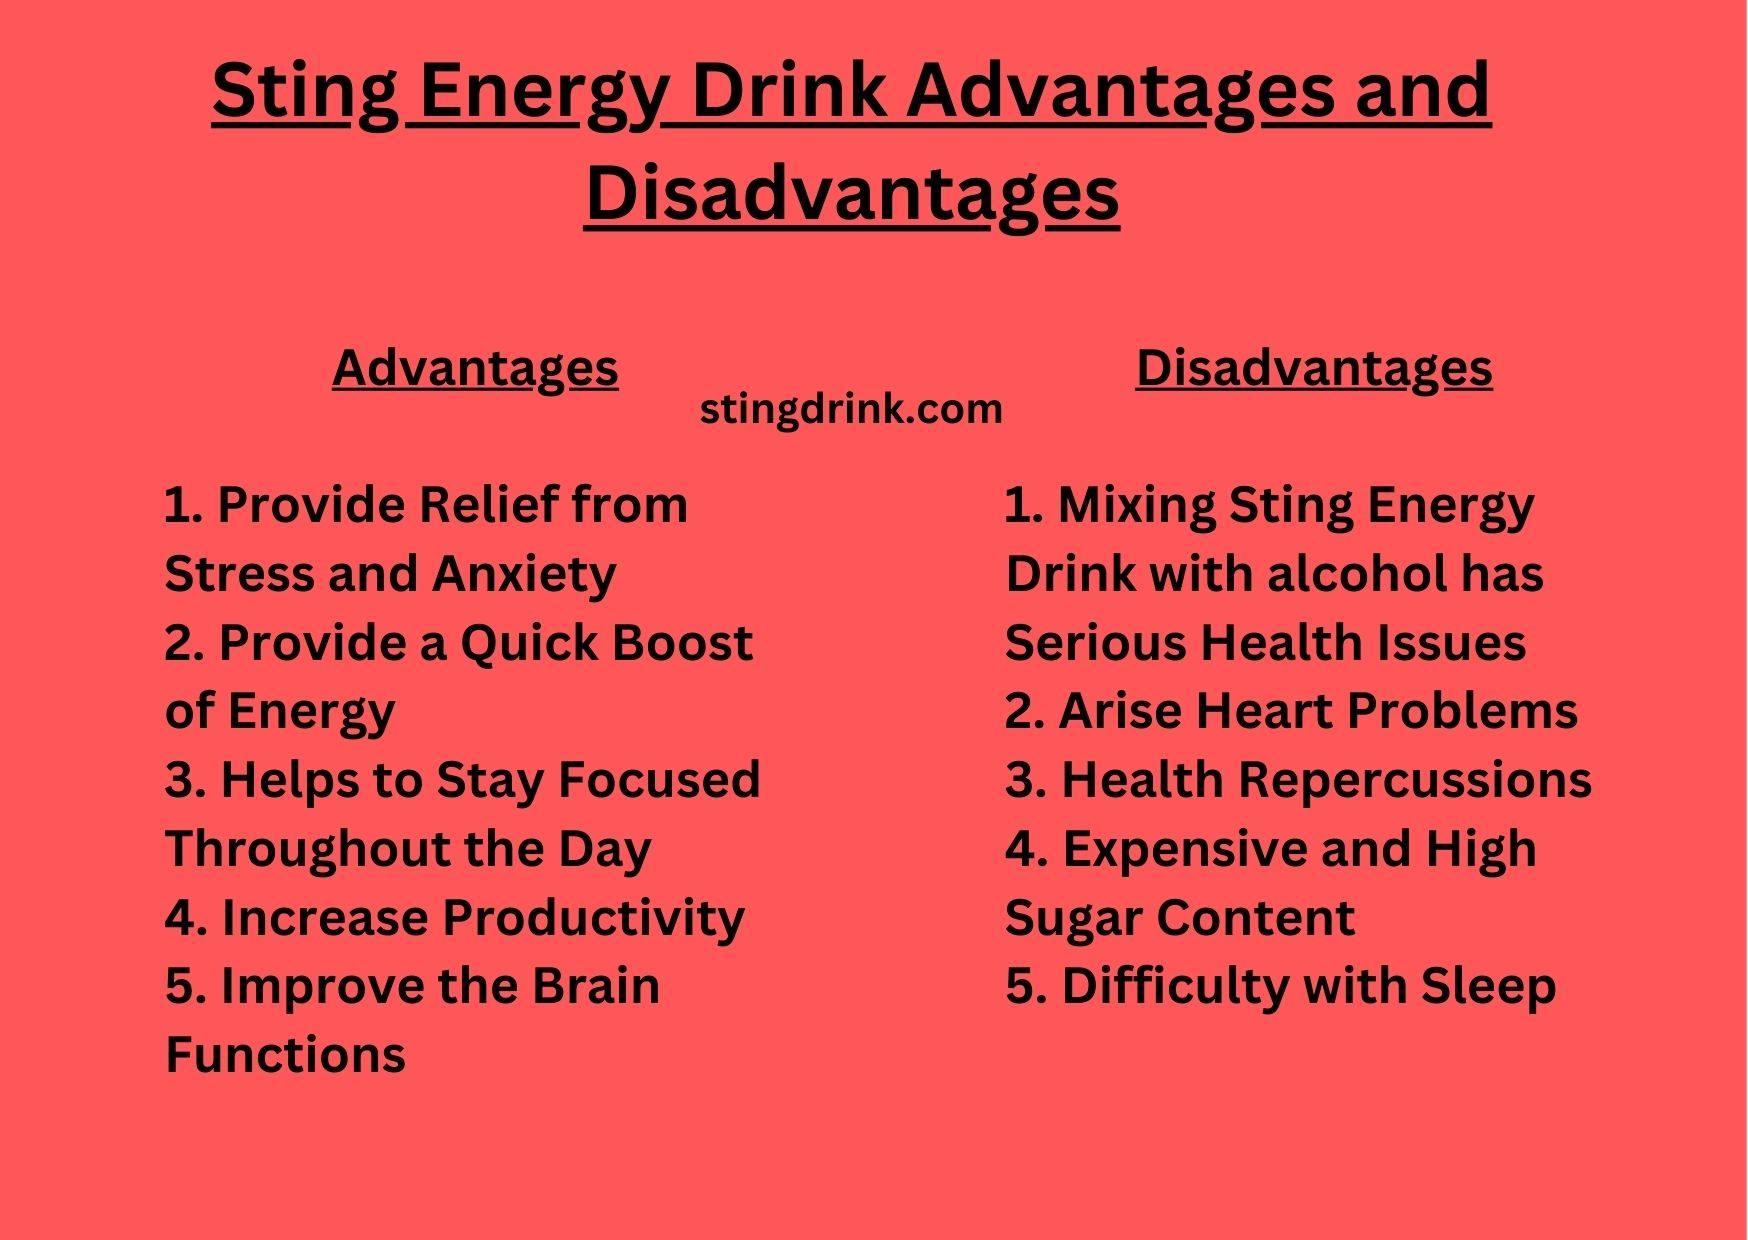 5 Sting Energy Drink Advantages and Disadvantages